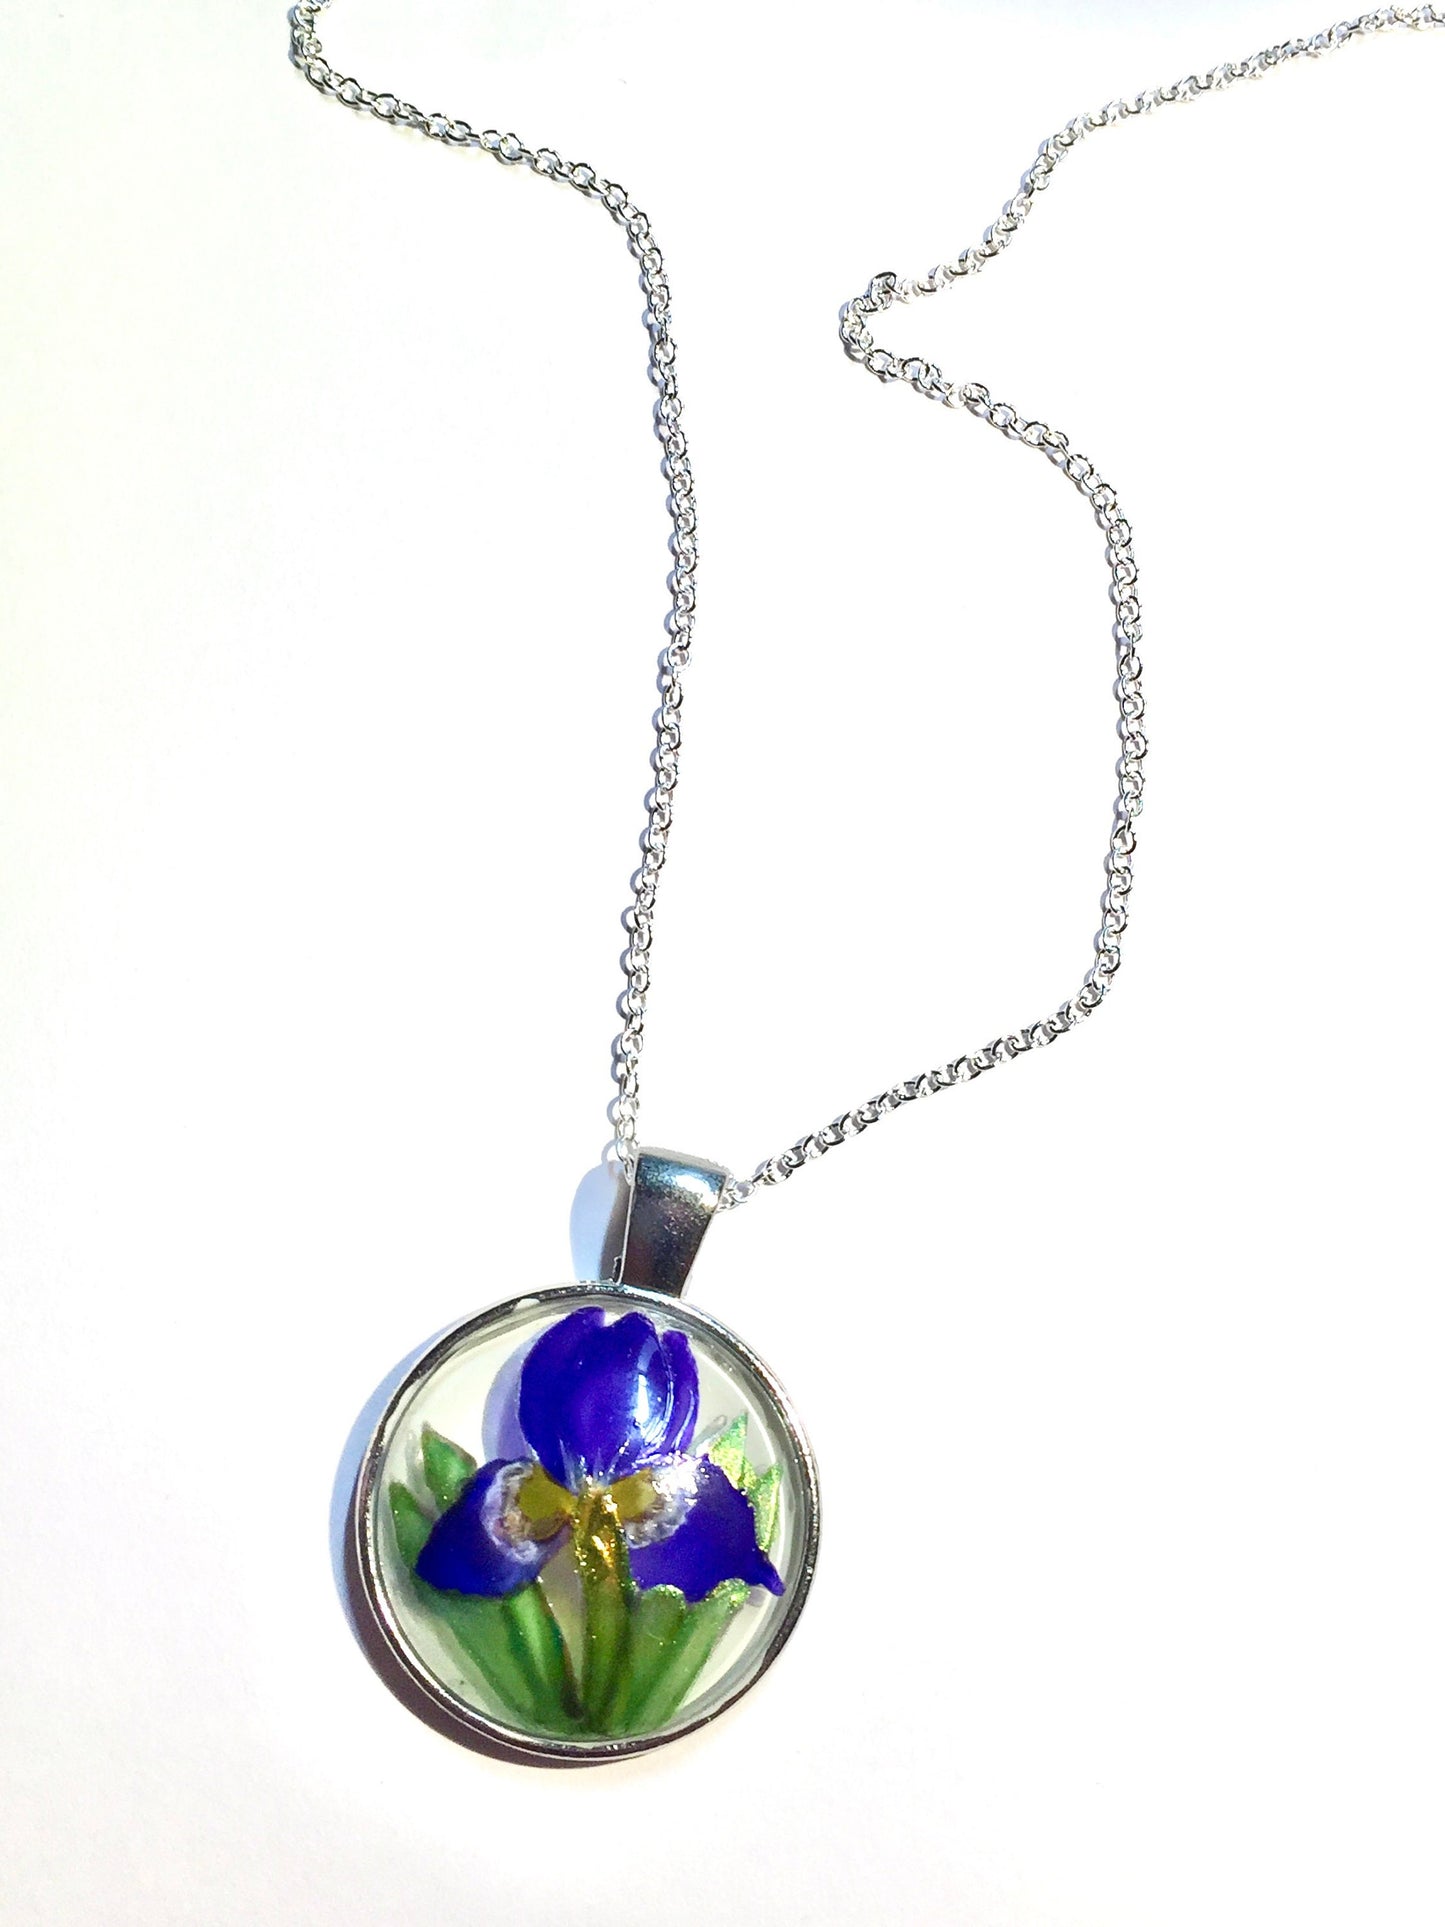 Iris hand painted glass pendant necklace